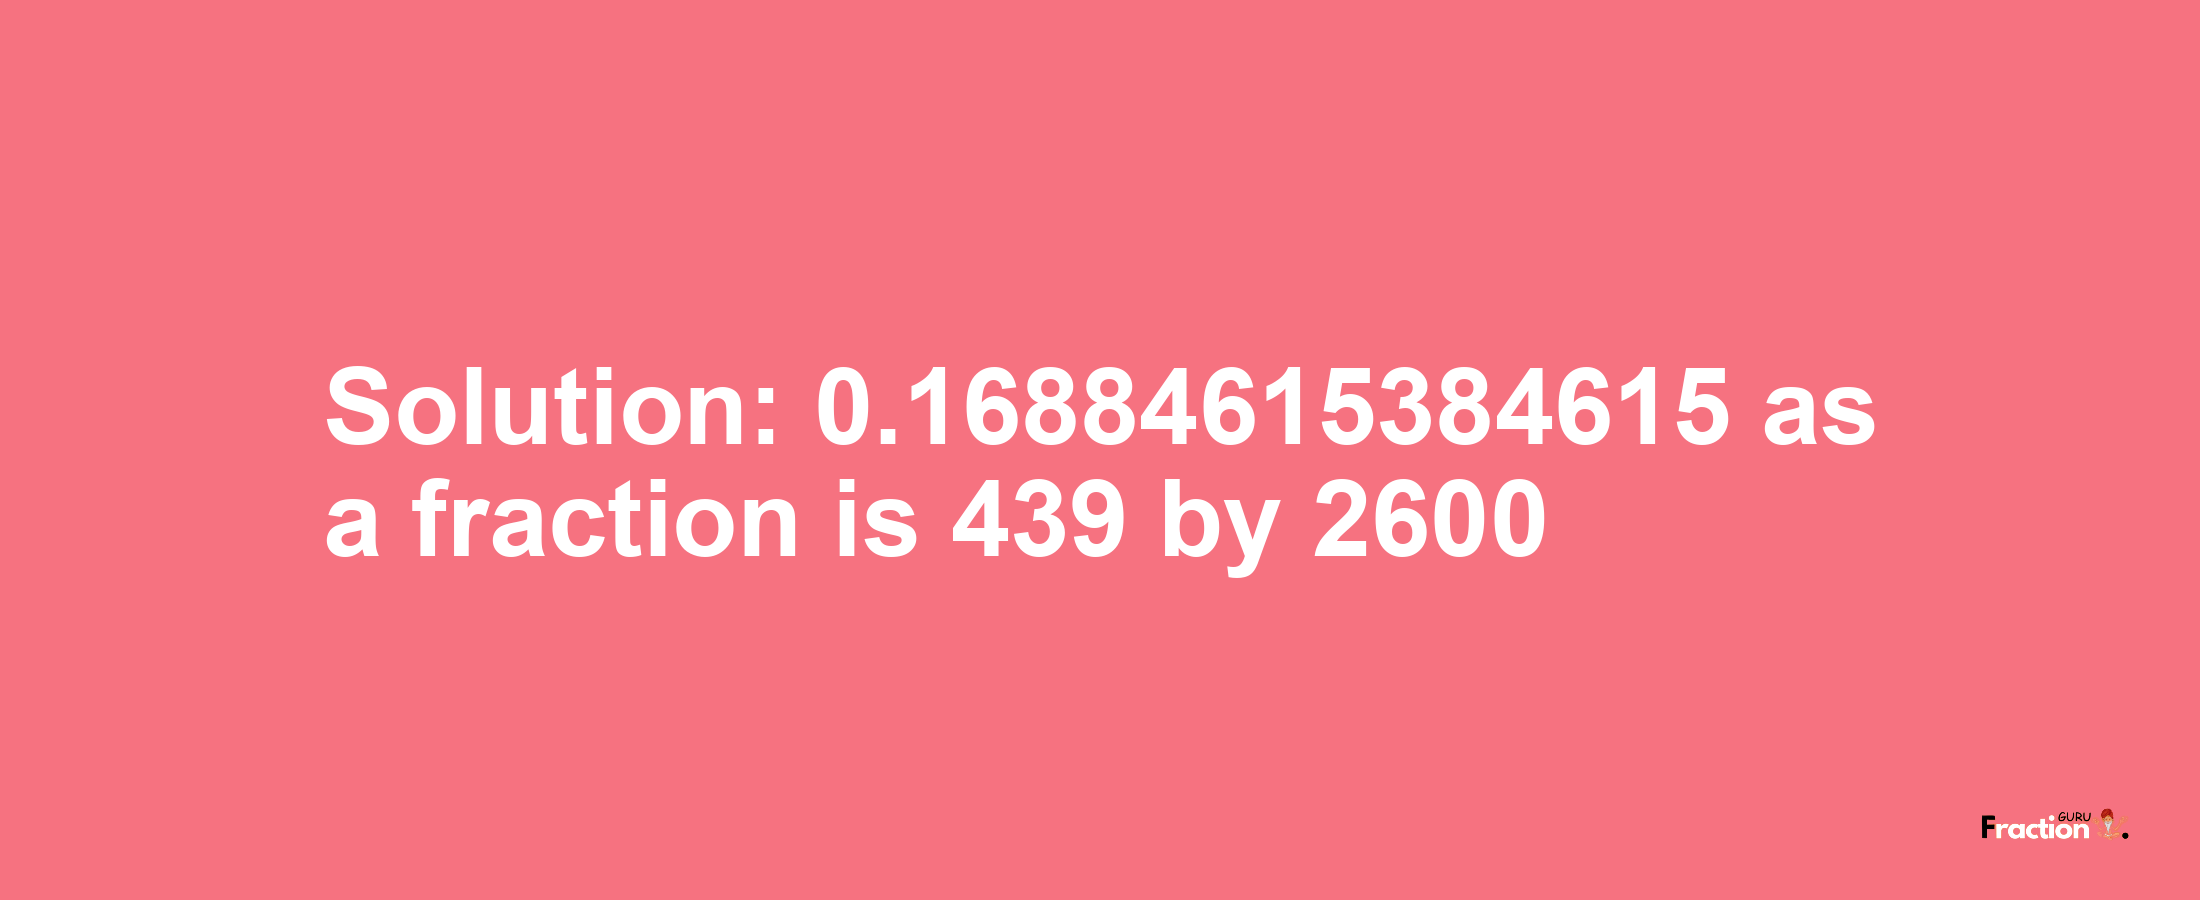 Solution:0.16884615384615 as a fraction is 439/2600